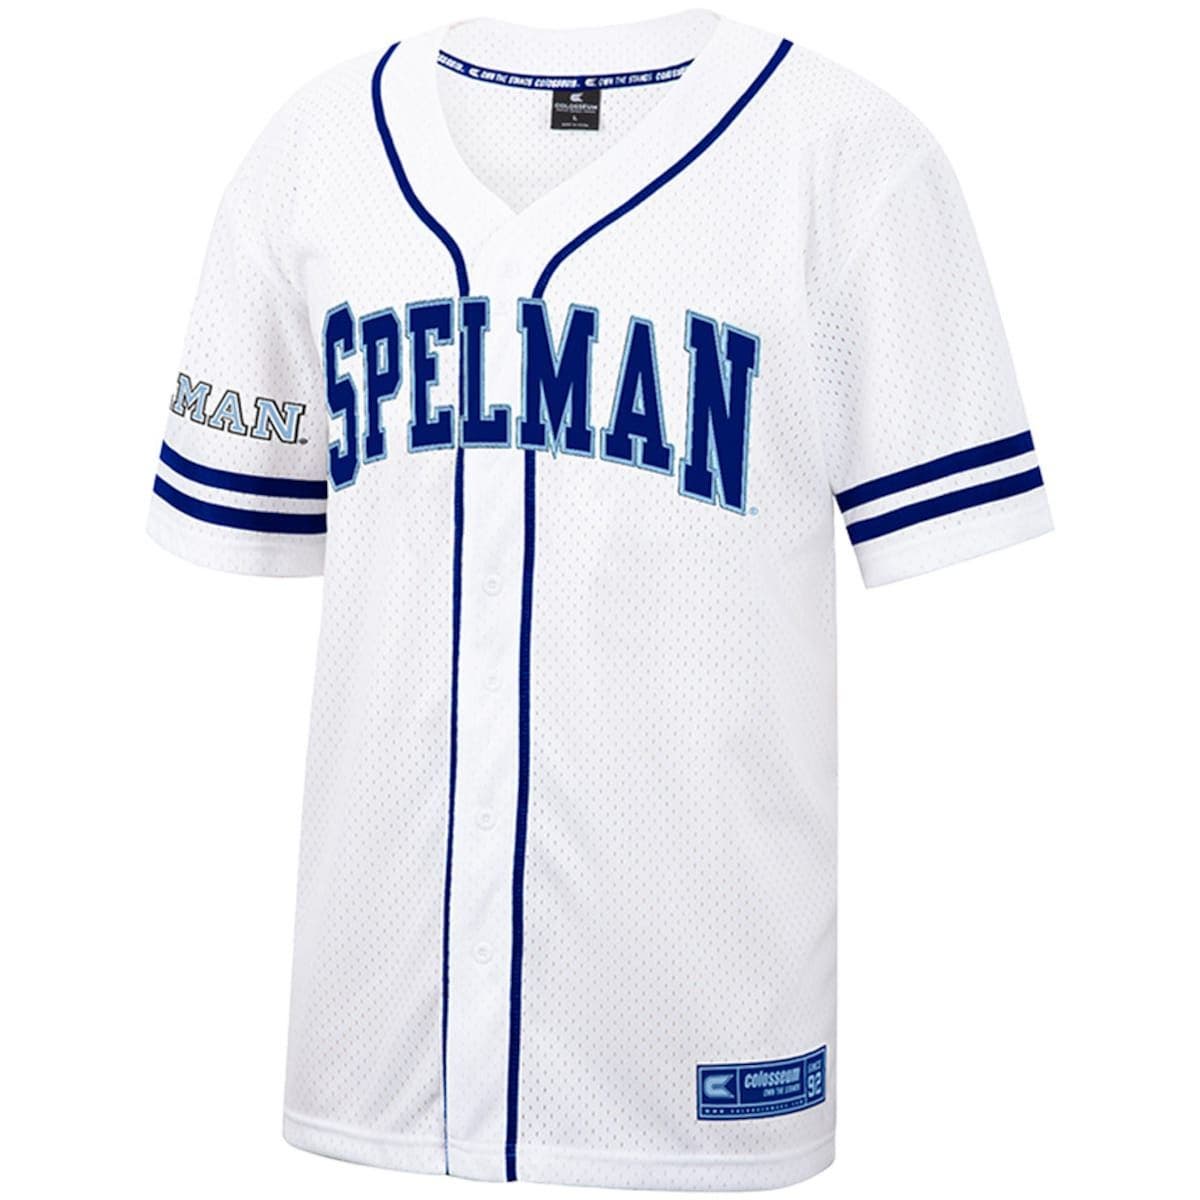 Colorado State Rams Colosseum Free Spirited Mesh Button-Up Baseball Jersey  - White